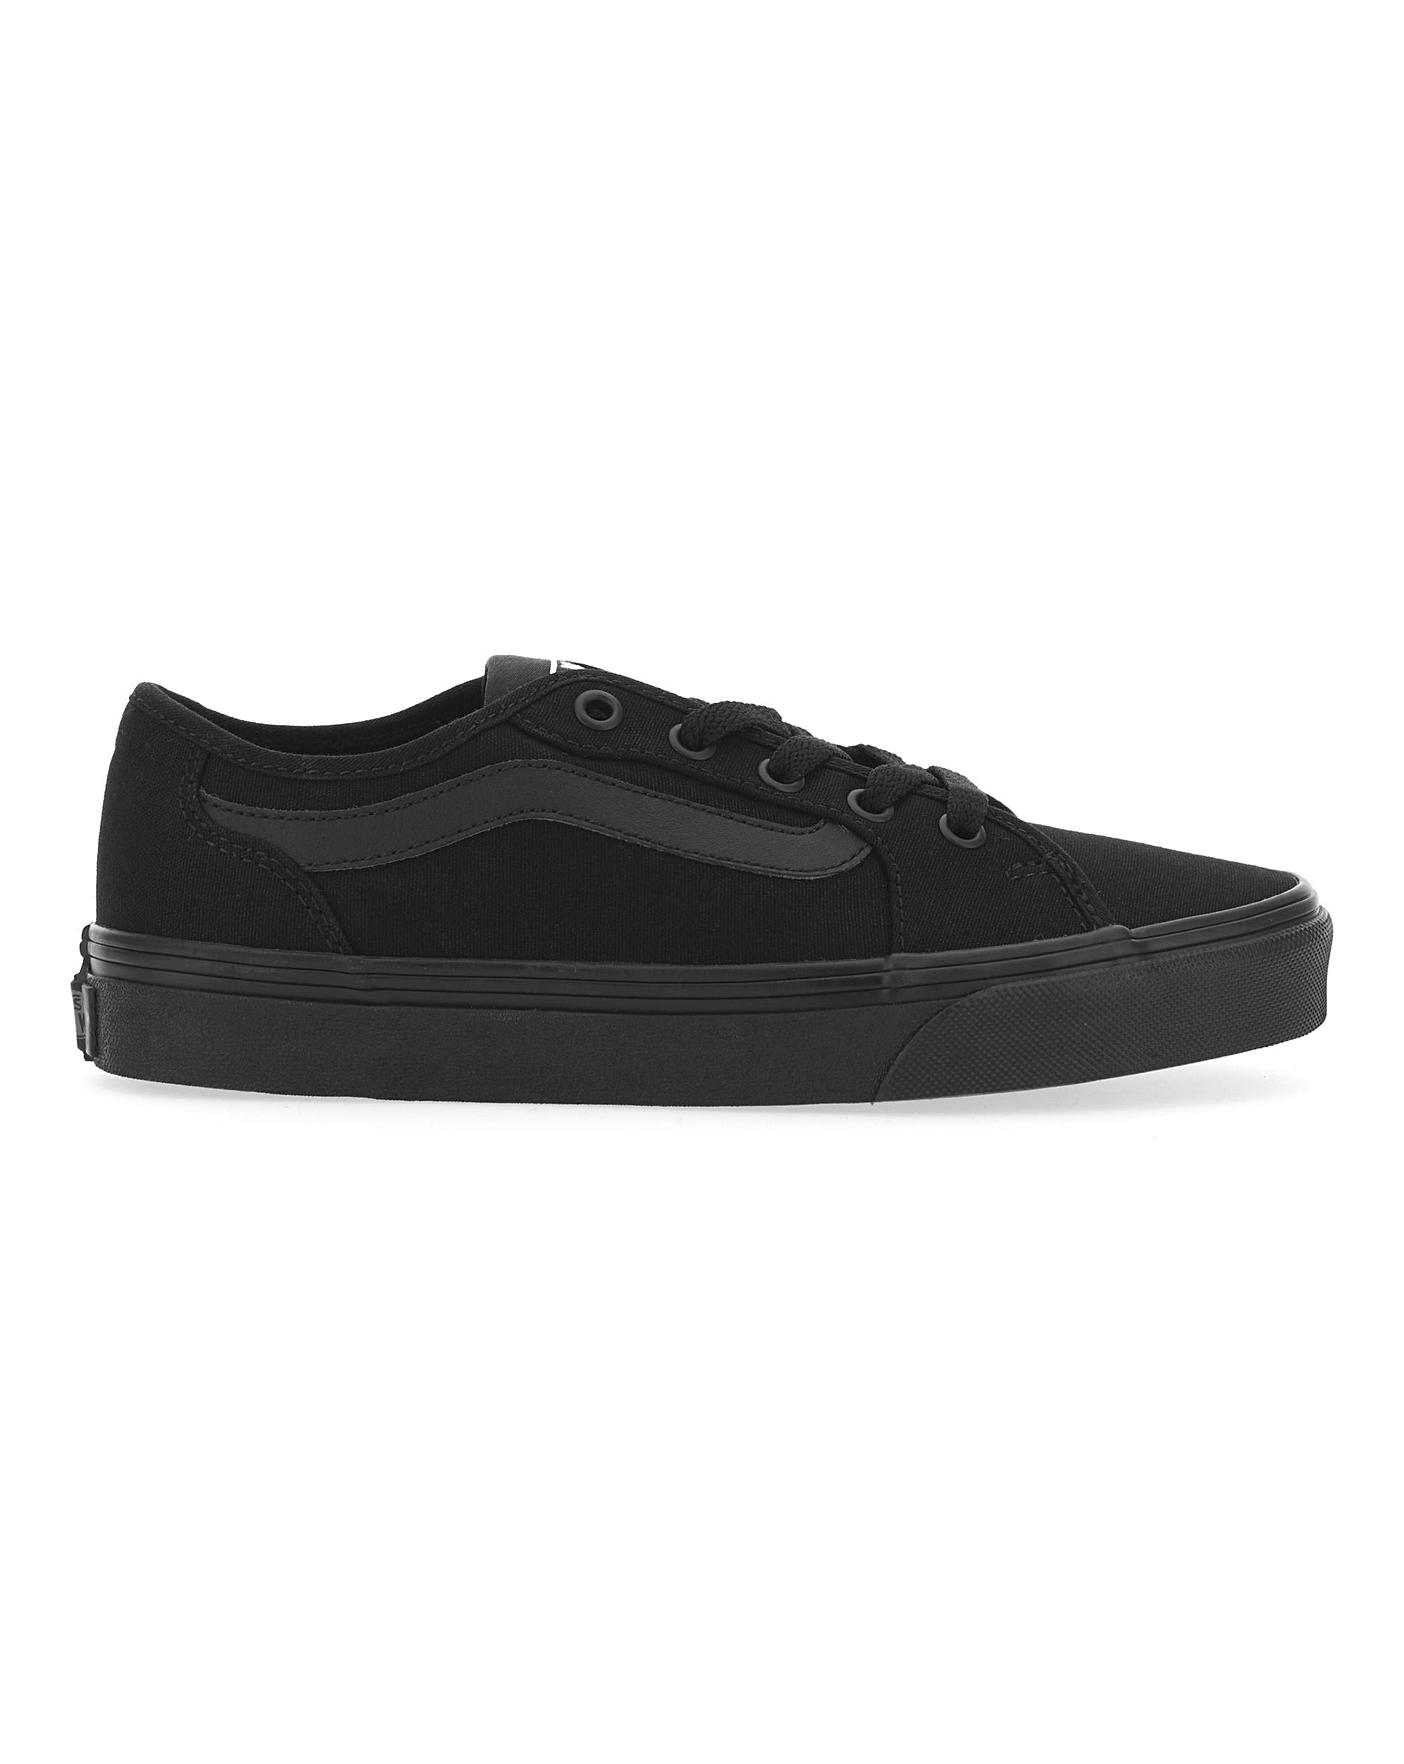 Vans Filmore Decon Trainers | Simply Be